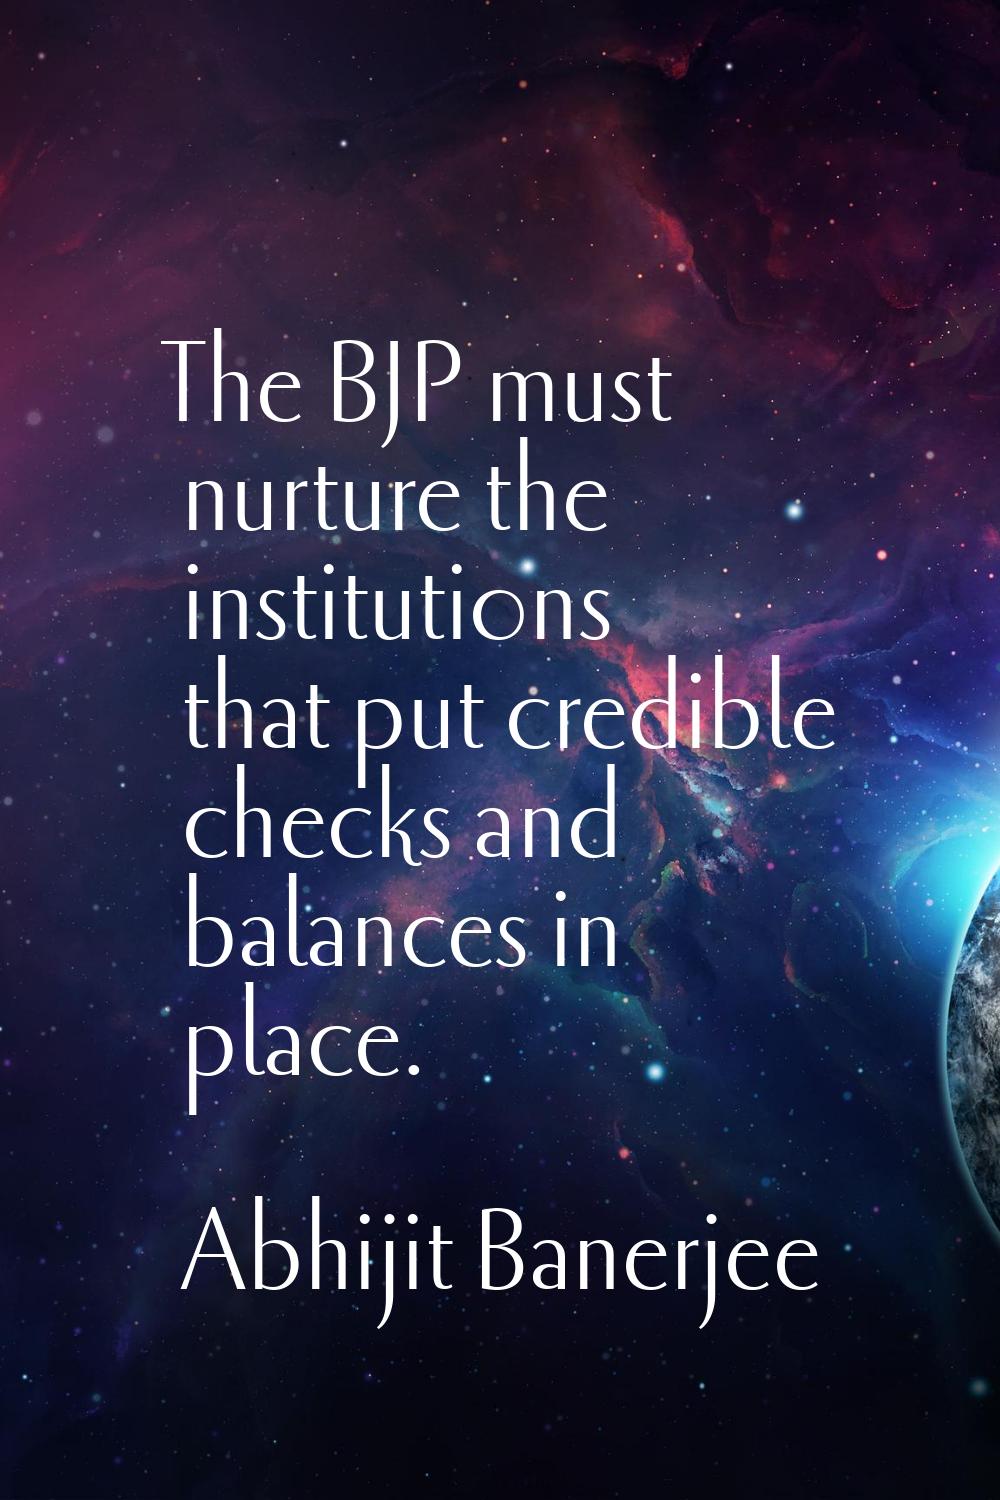 The BJP must nurture the institutions that put credible checks and balances in place.